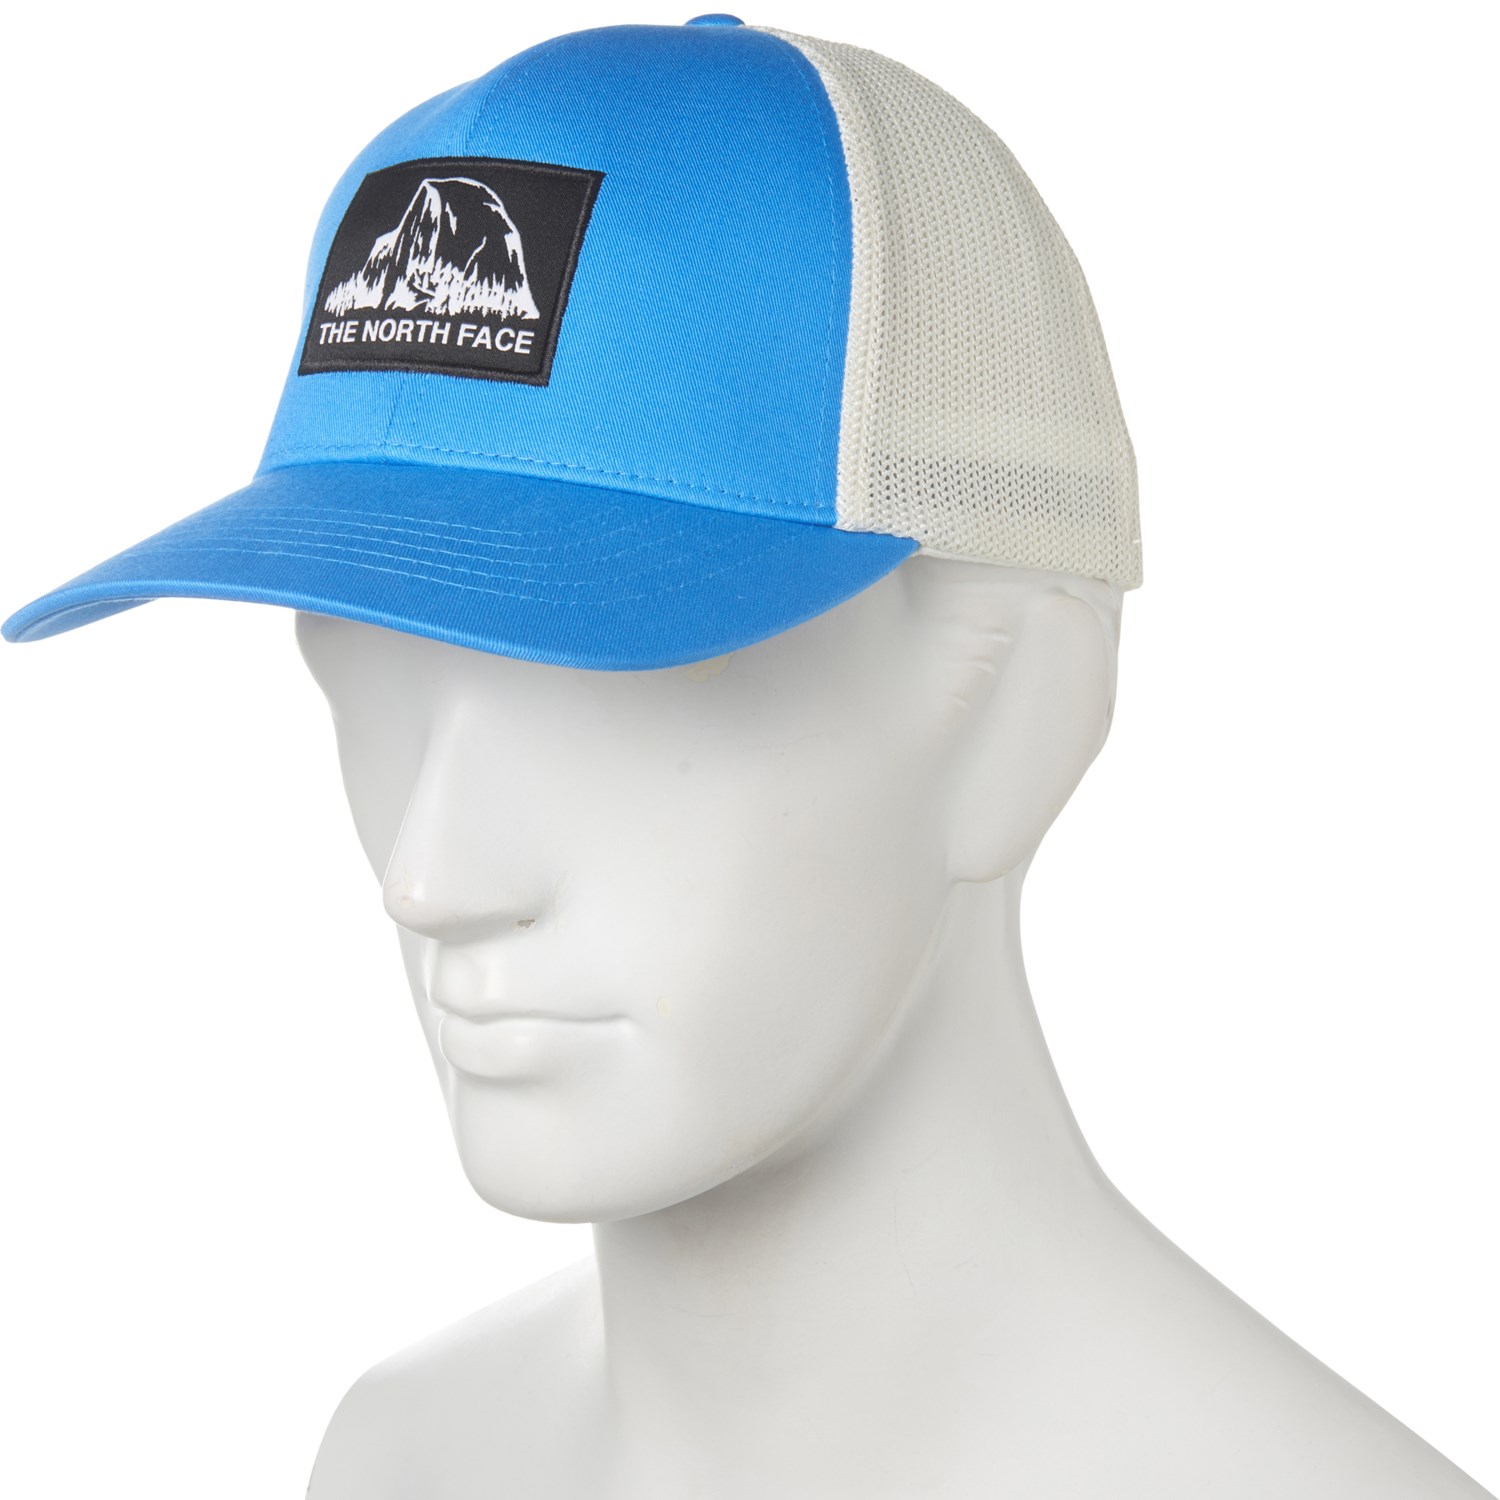 The North Face Truckee Trucker Hat (For Men)